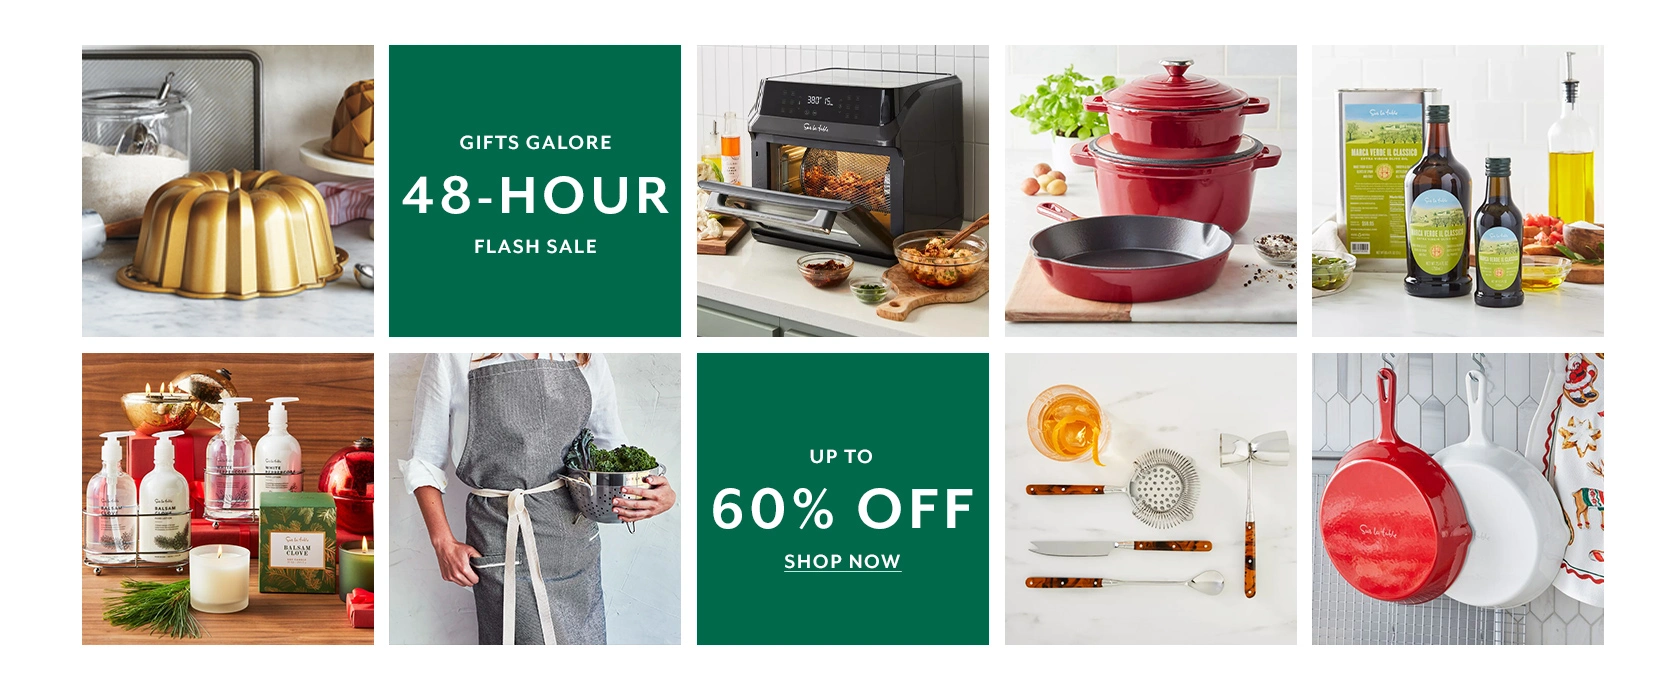 Gifts Galore 48-hour flash sale up to 60% off, shop now.